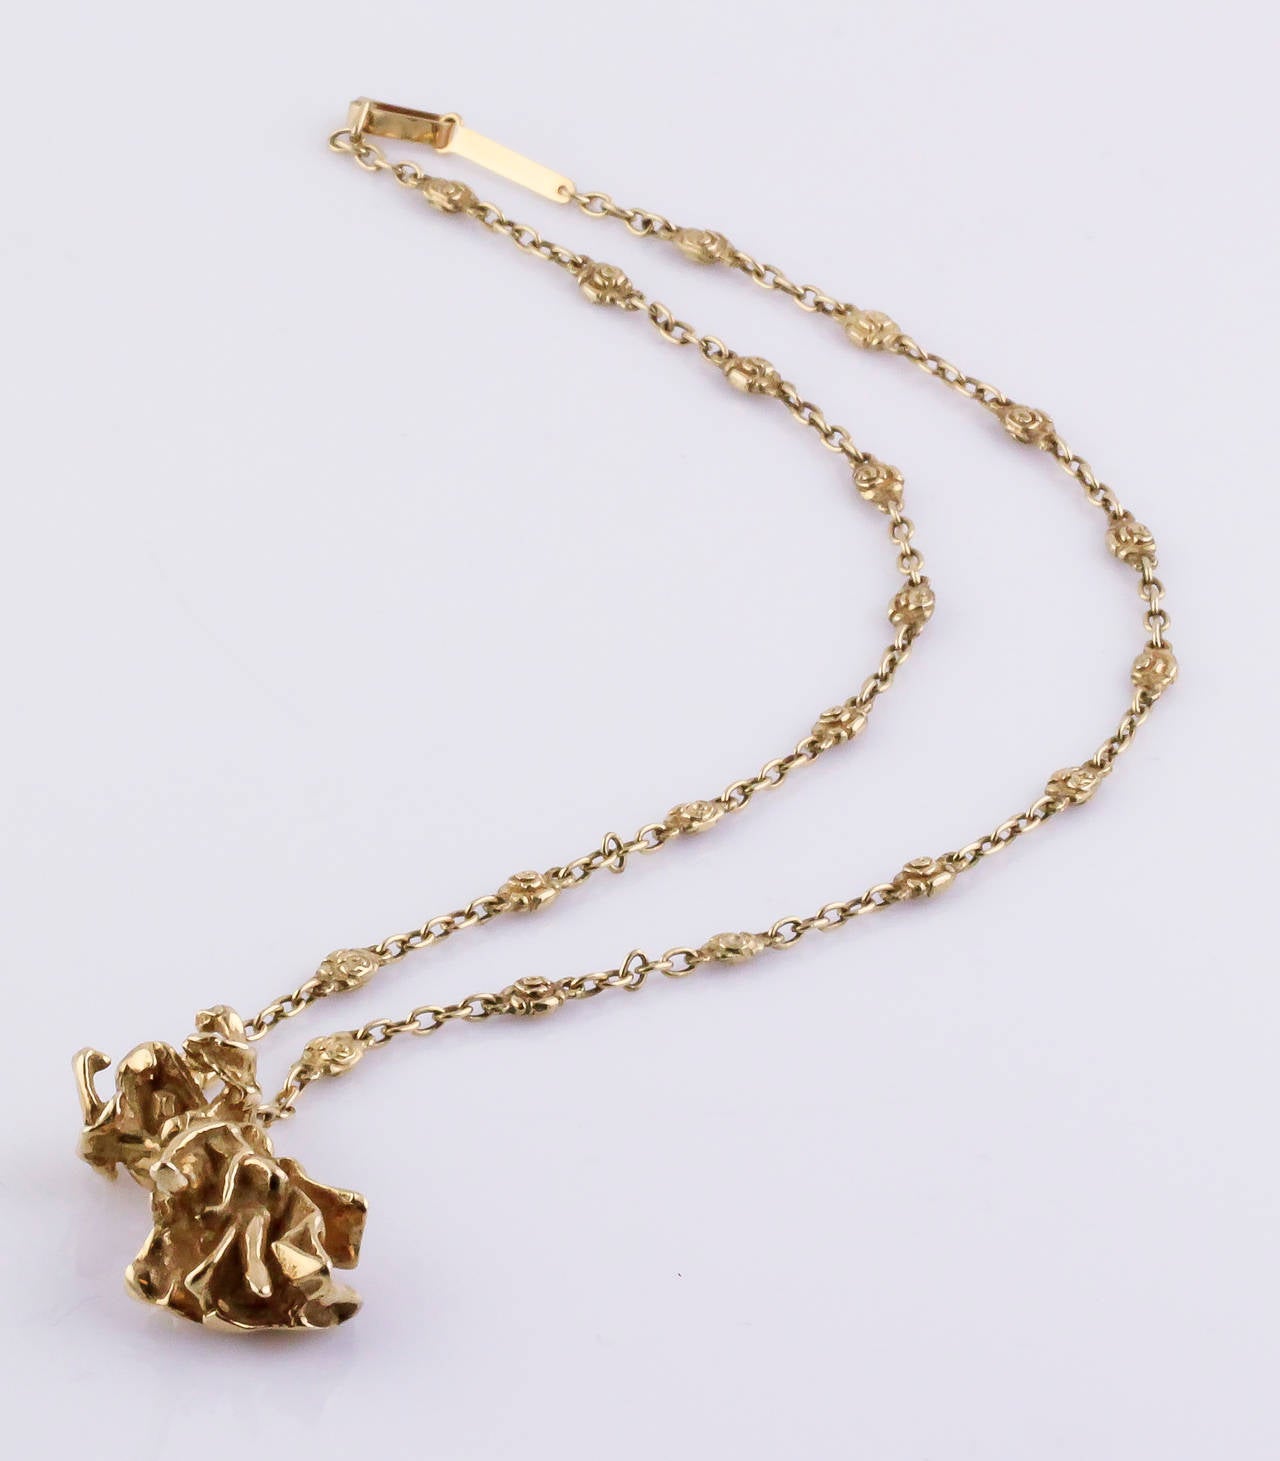 Whimsical 18K yellow gold pendant necklace by Salvator Dali. It features the likeness of Carmen, of the famous opera by Georges Bizet. The chain features rose-like links along with plain links. Limited edition of 1000, this being #109. Pendant